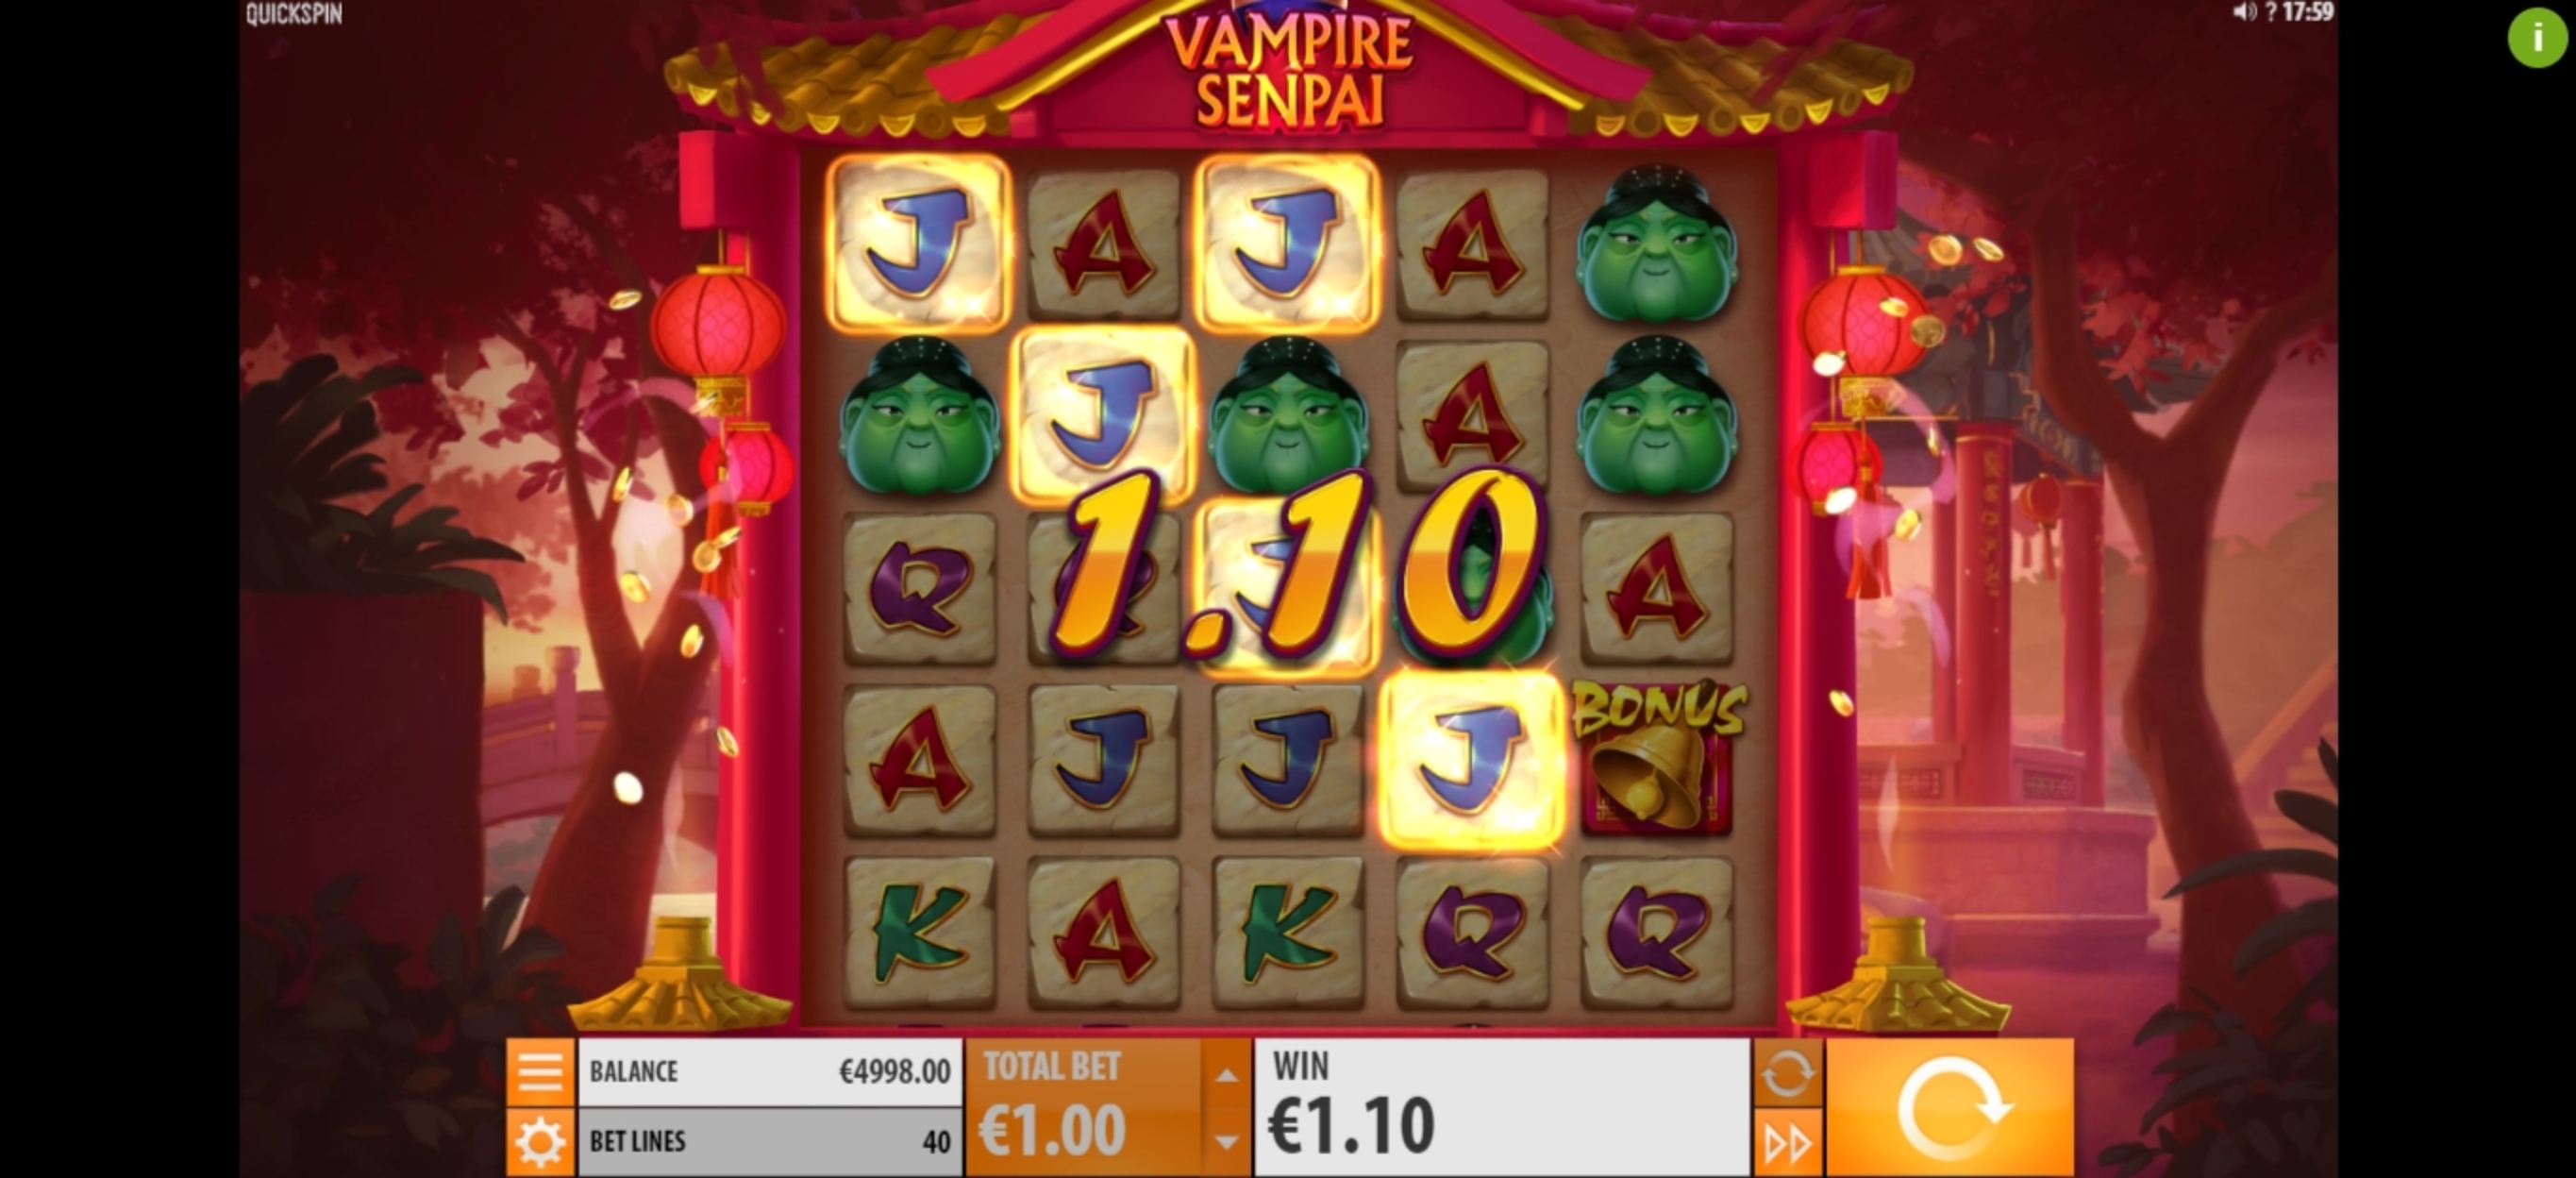 Win Money in Vampire Senpai Free Slot Game by Quickspin